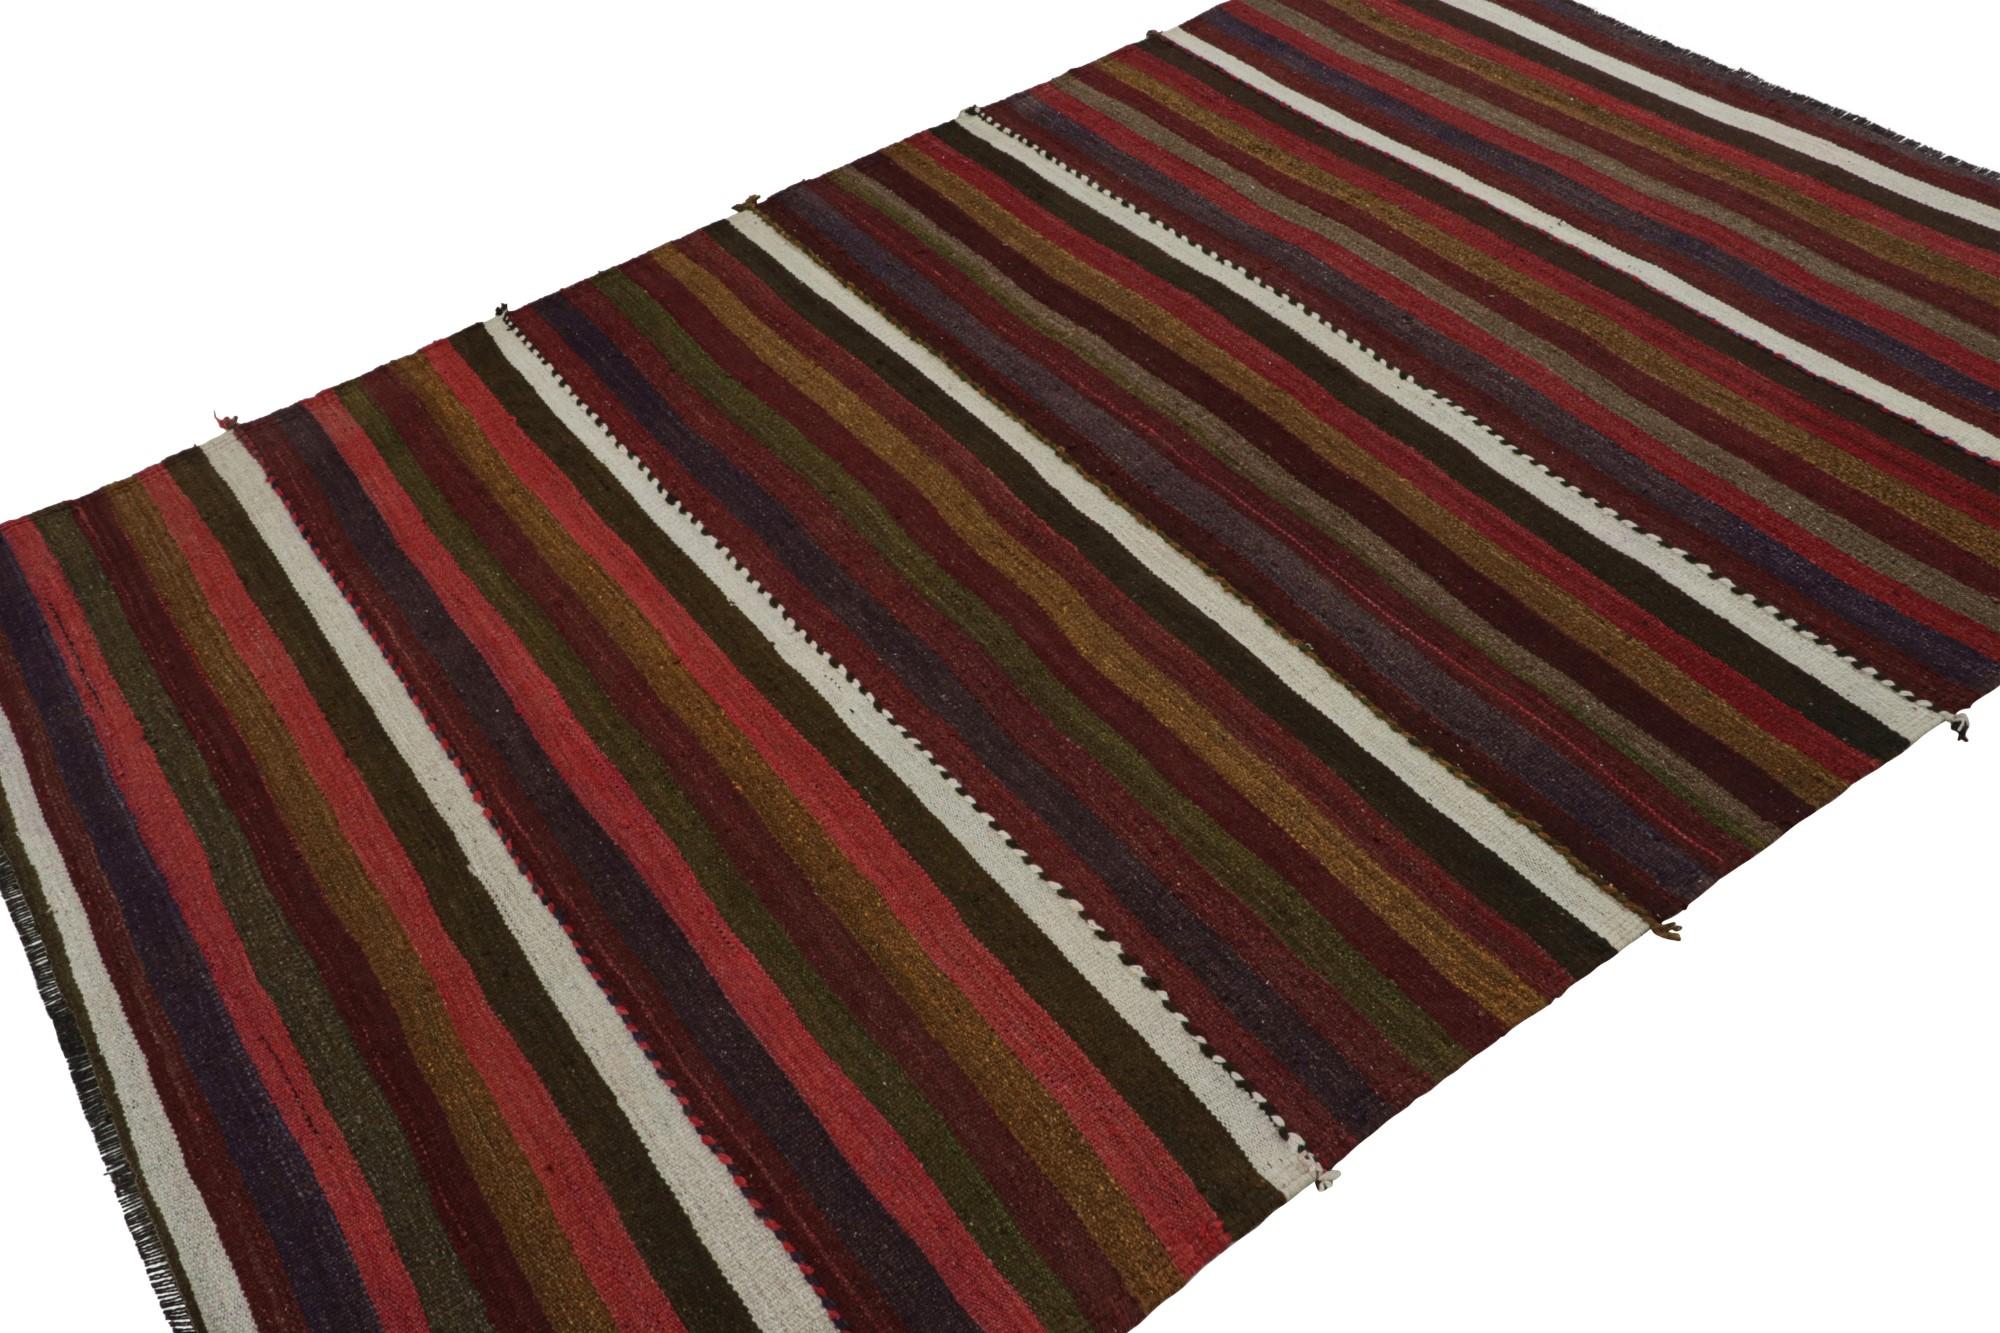 Hand knotted in wool, this 6x9 vintage Afghan tribal kilim rug is an extraordinarily simple piece with colorful stripes and a simple presence. 

On the Design:

As an exciting new curation in Rug & Kilim Collection, this rug  features a series of